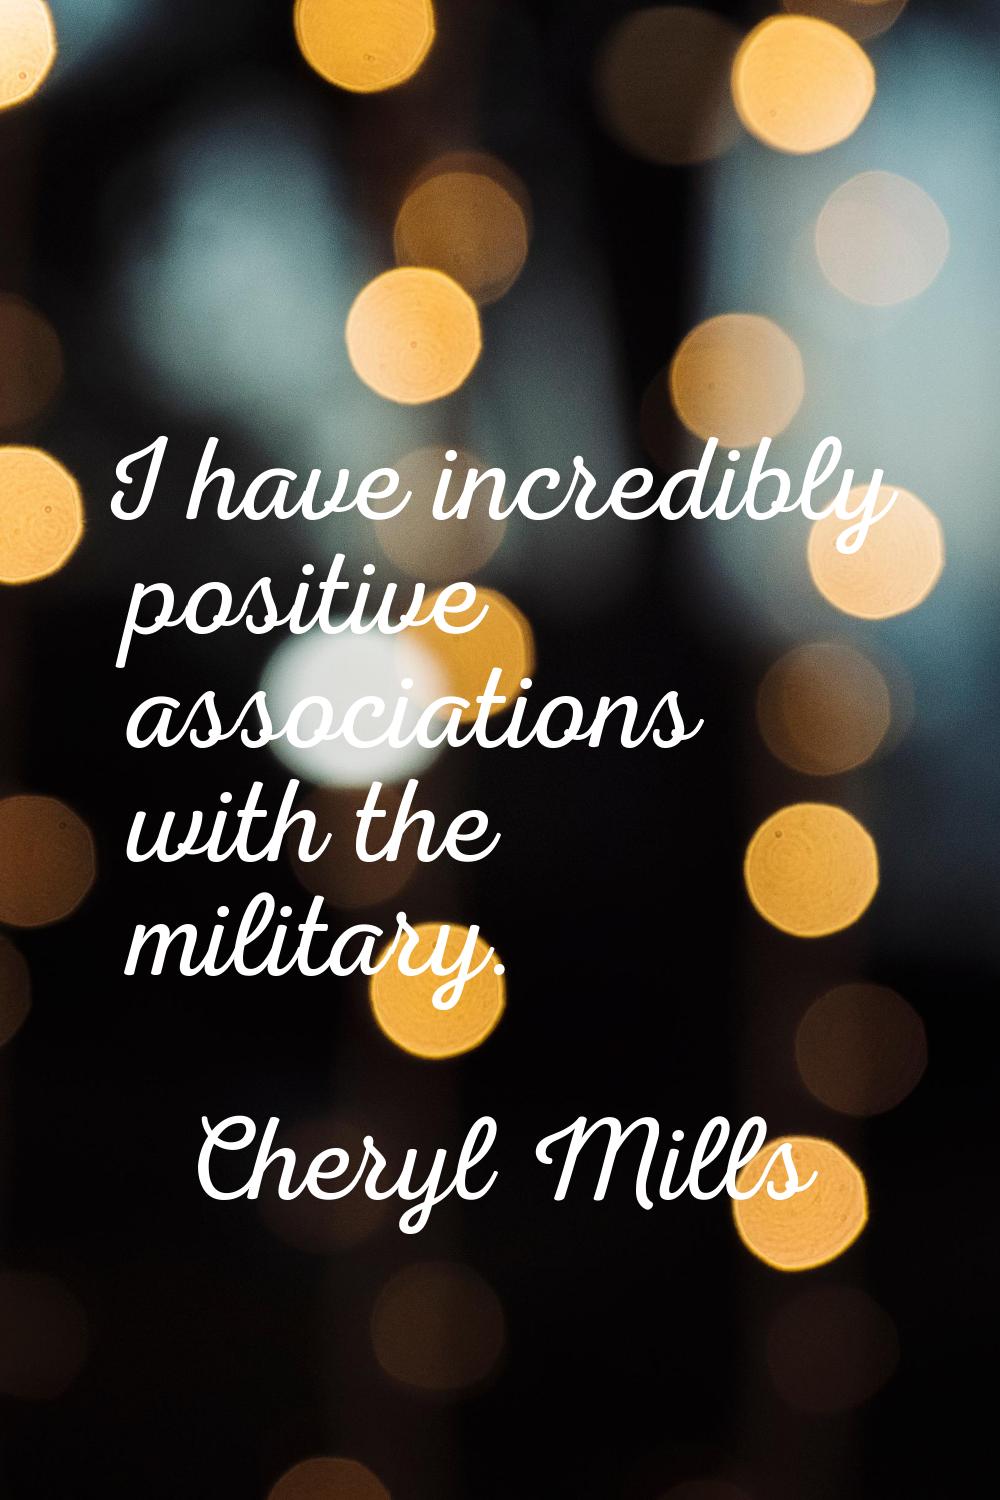 I have incredibly positive associations with the military.